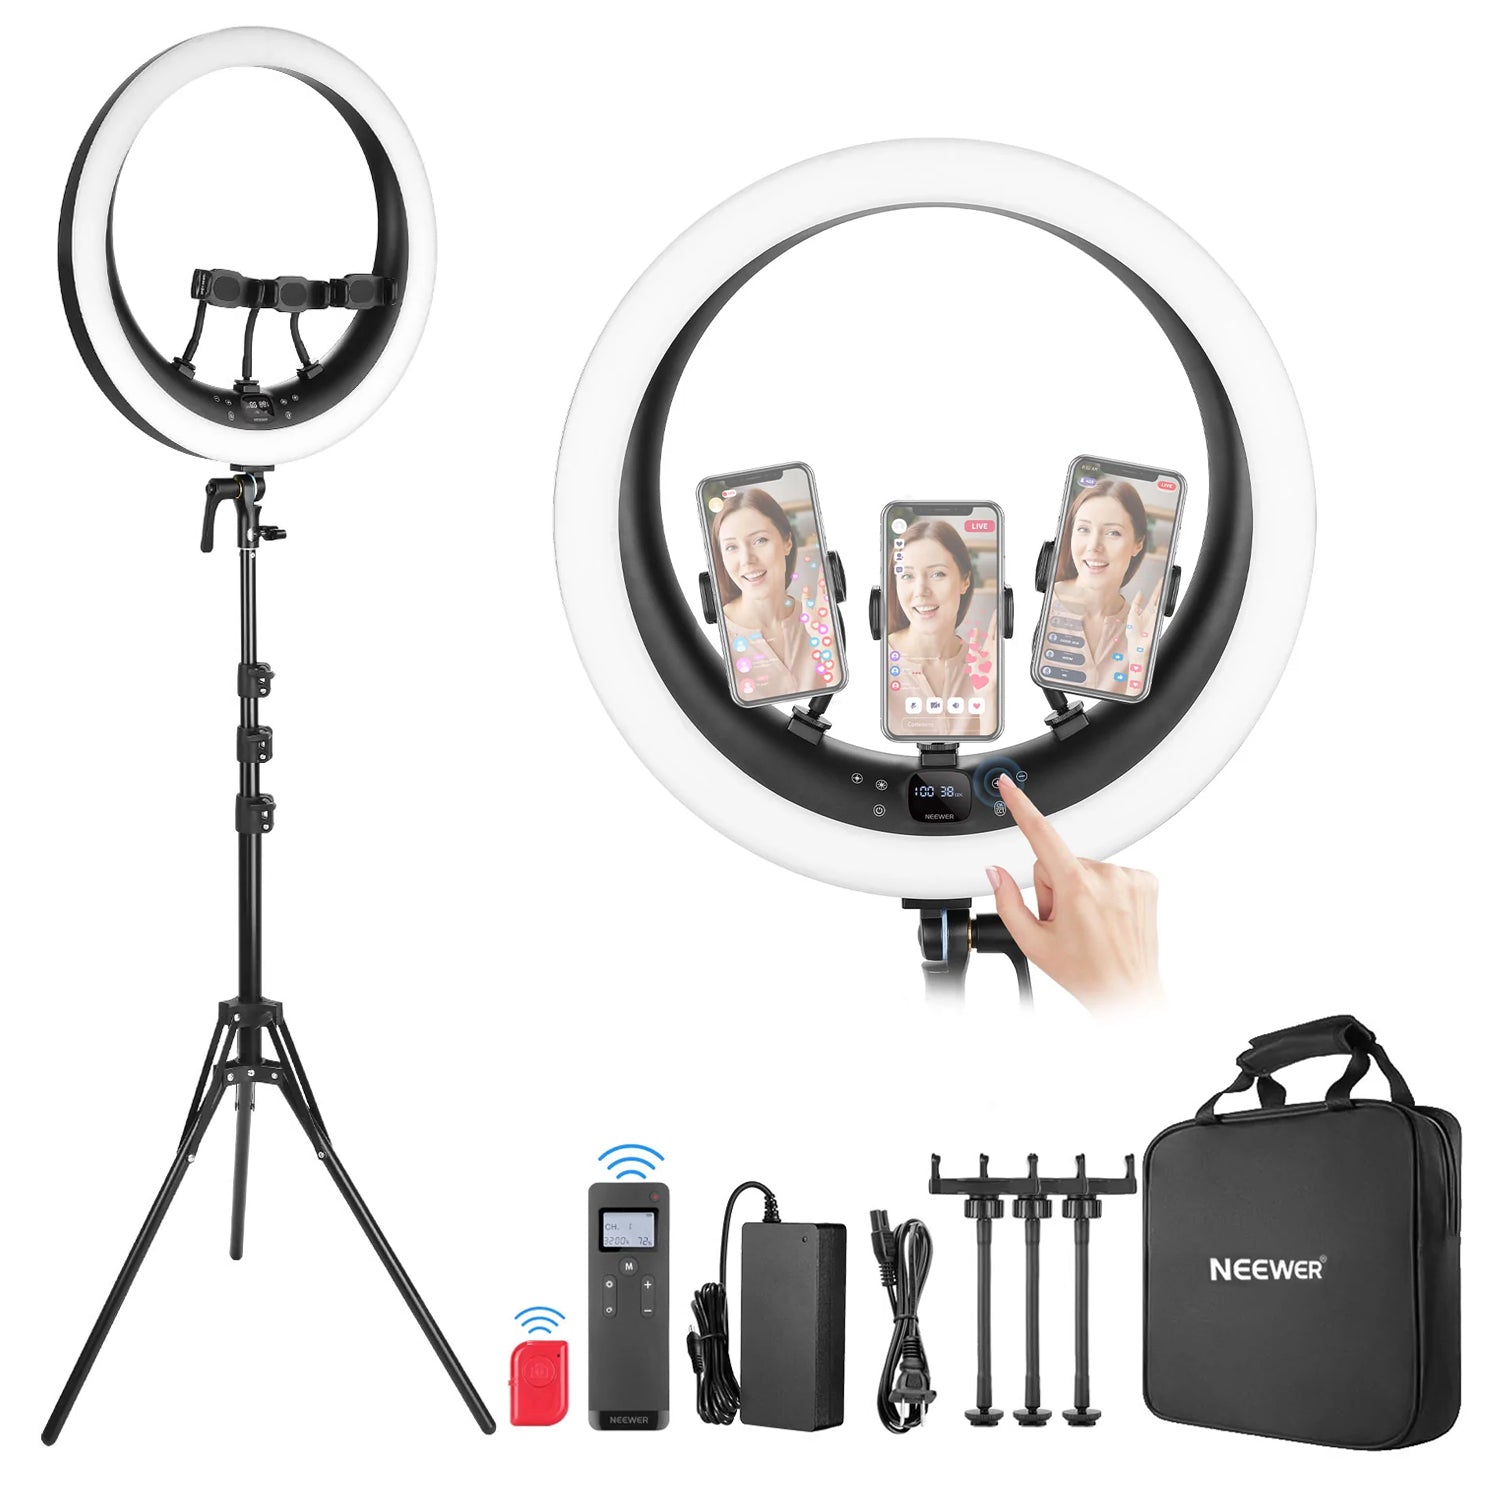 Neewer 12 RGB Selfie Ring Light with Stand, Dimmable LED Ringlight with  48-inch Tripod Stand, Phone Holder, Remote Control, 29 Colors Modes for